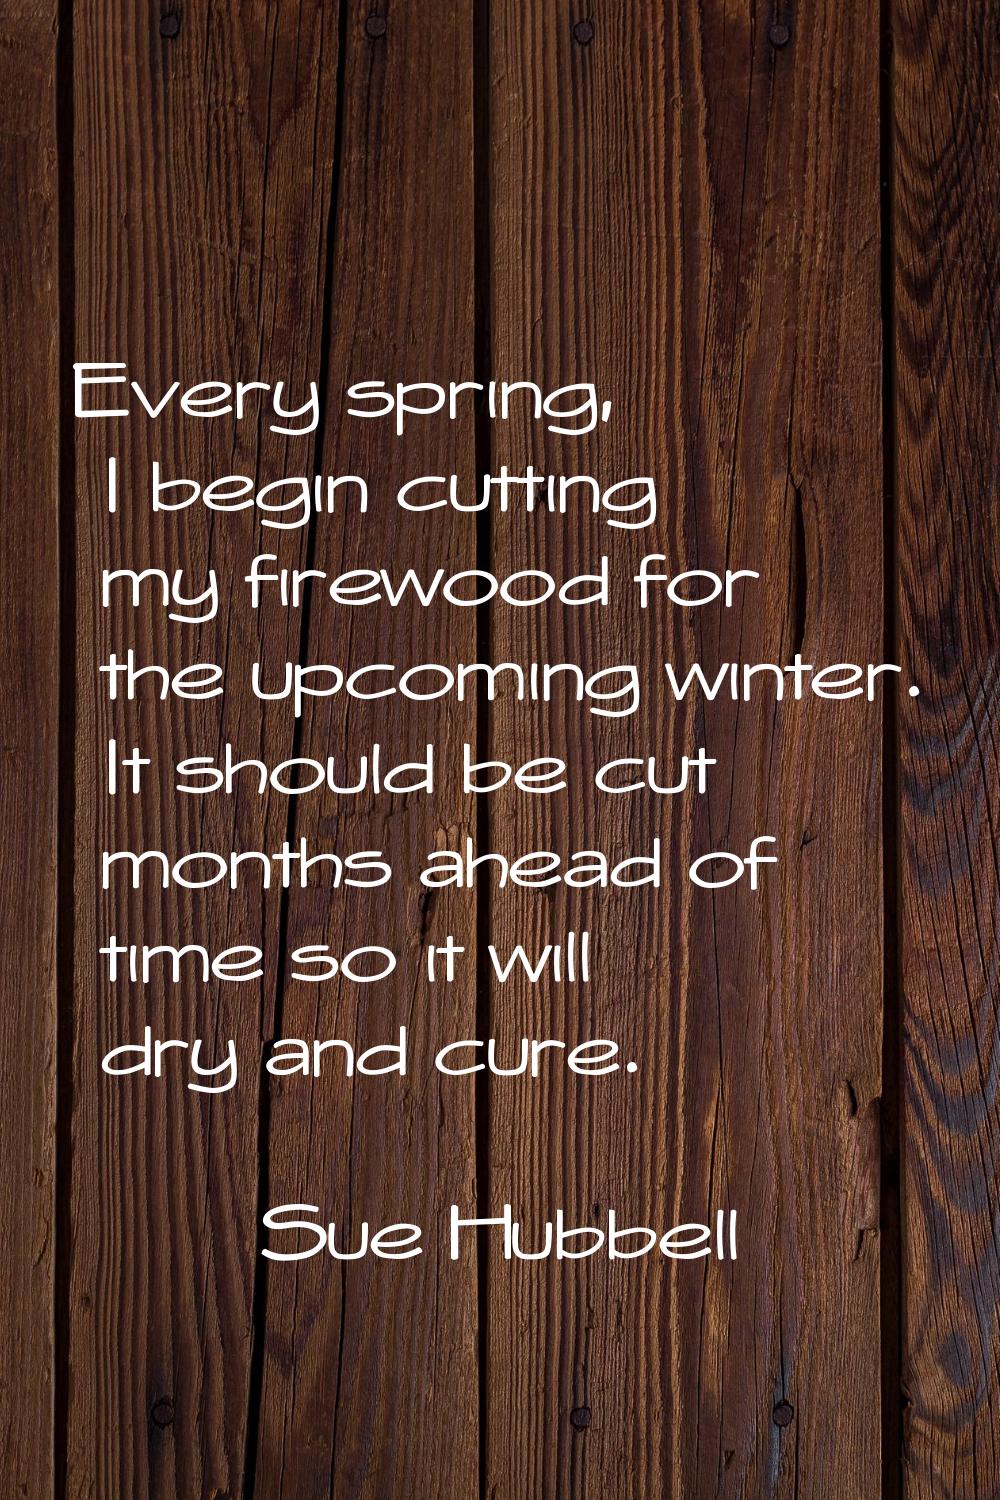 Every spring, I begin cutting my firewood for the upcoming winter. It should be cut months ahead of